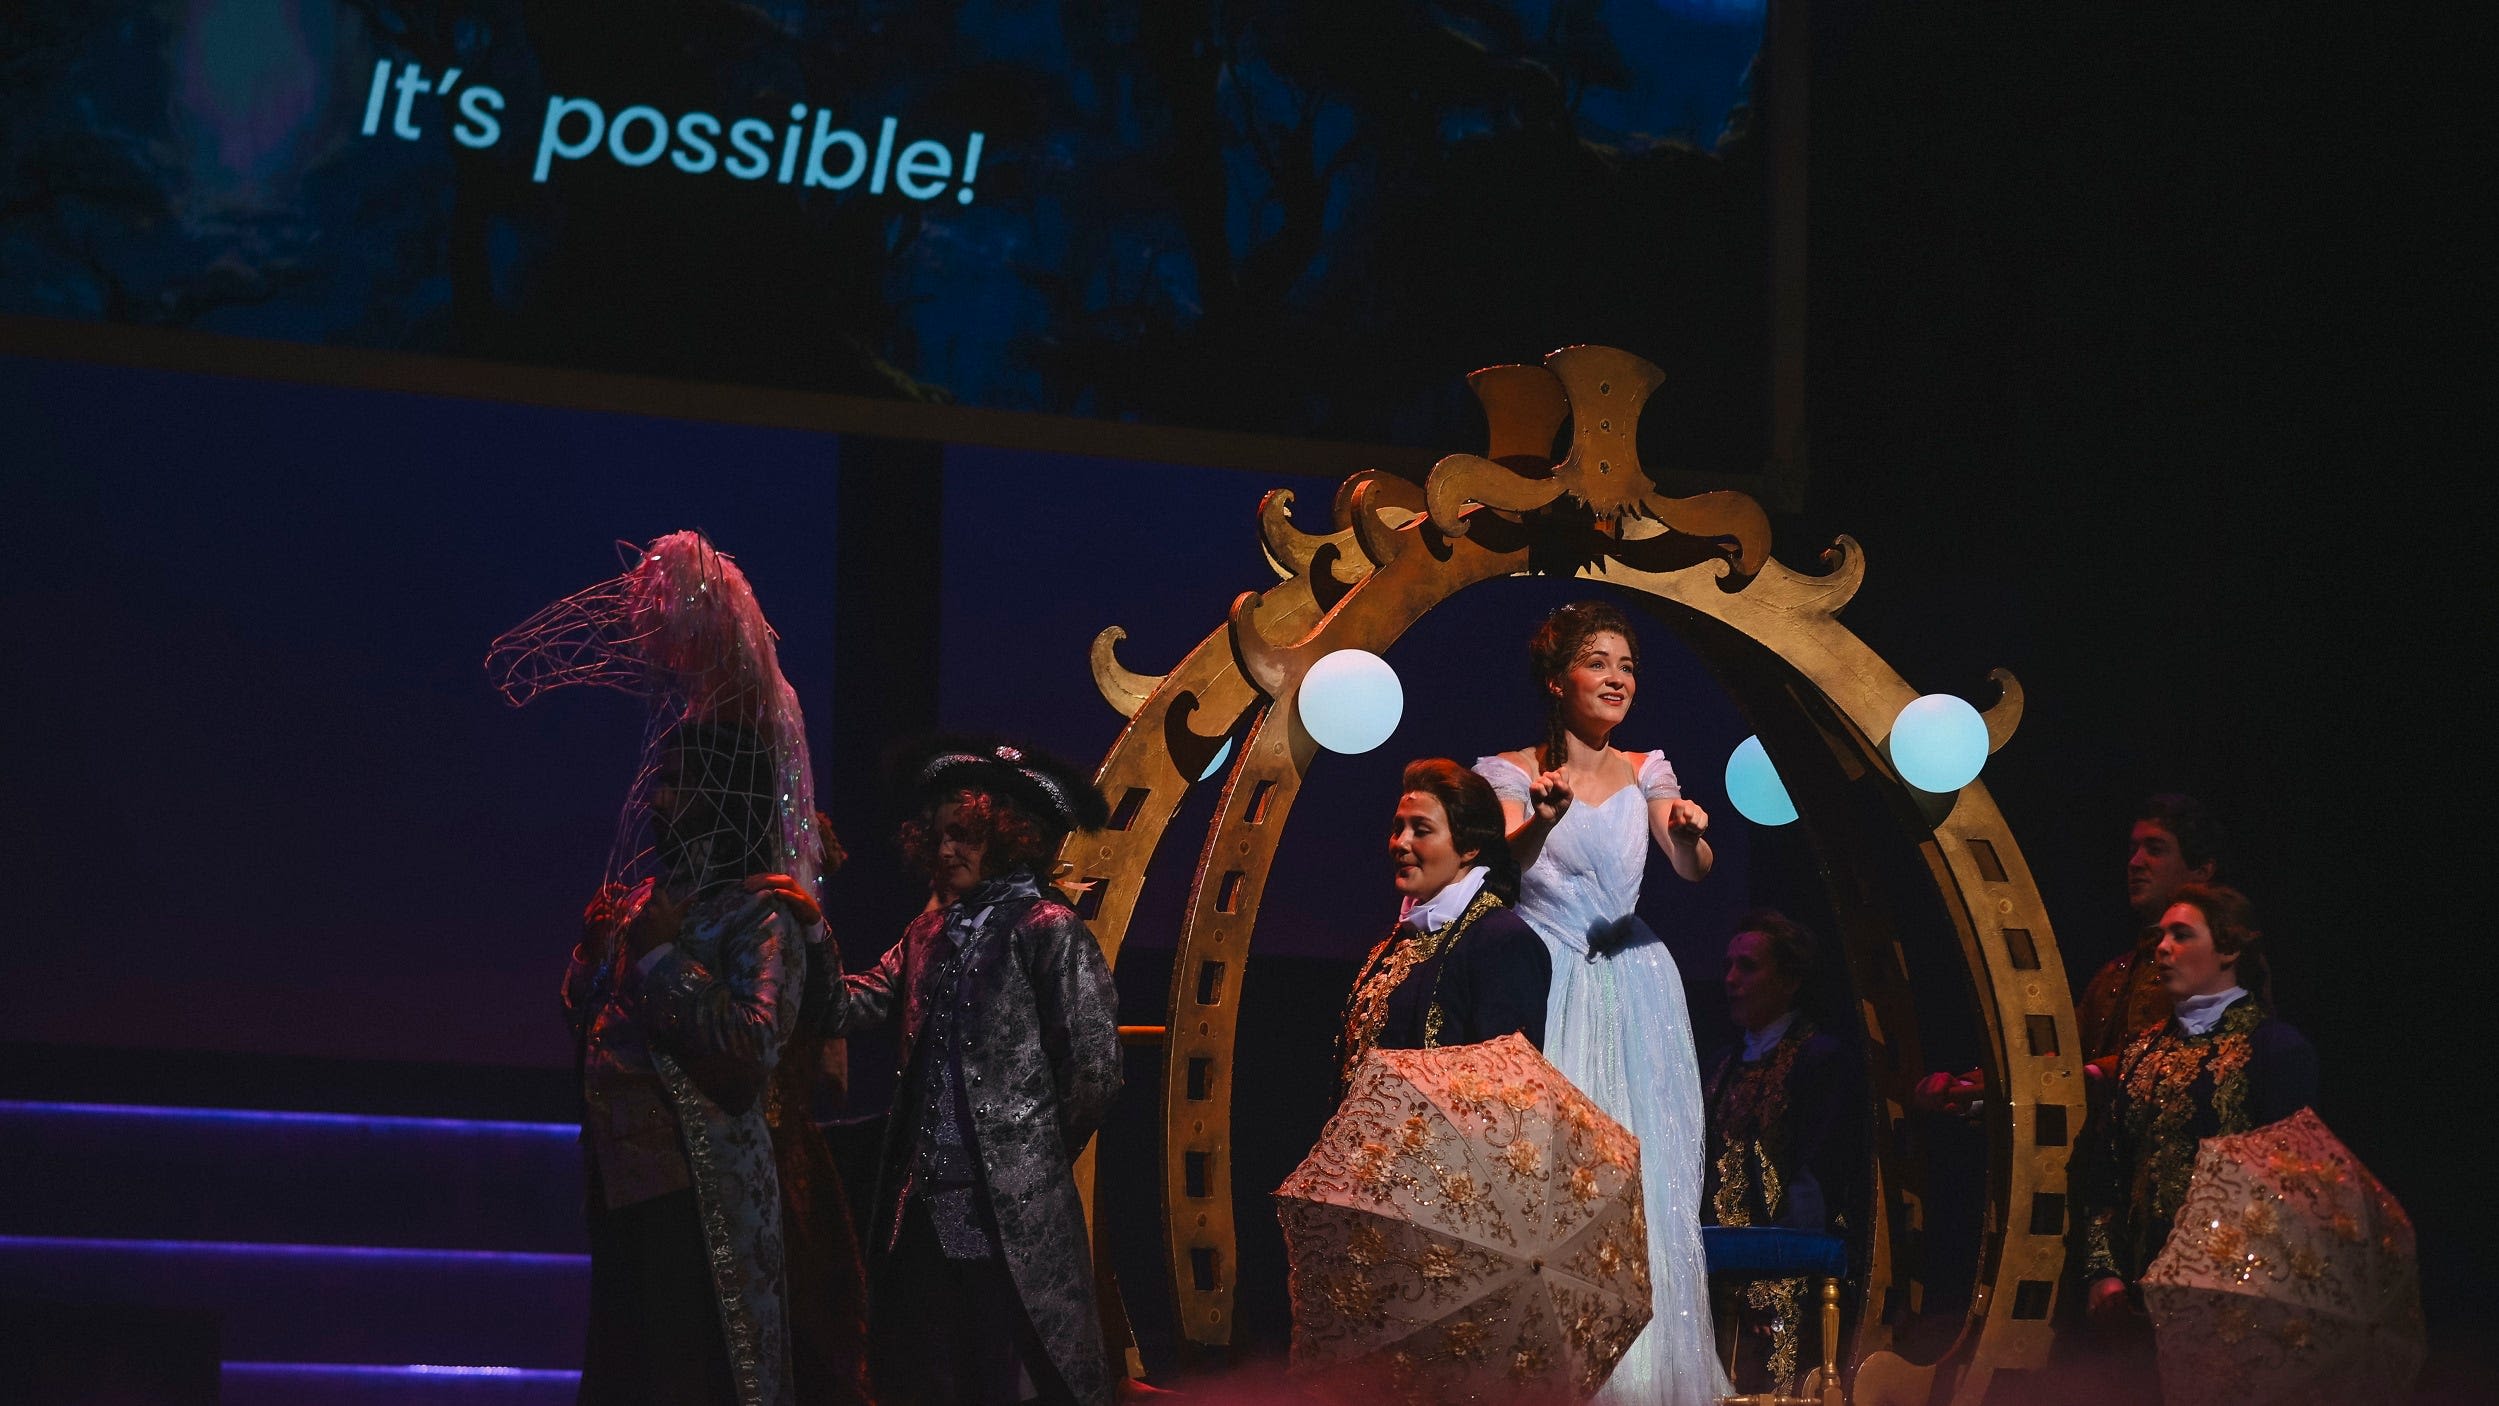 Starring deaf and hearing actors, OKC theater's staging of 'Cinderella' is extra magical